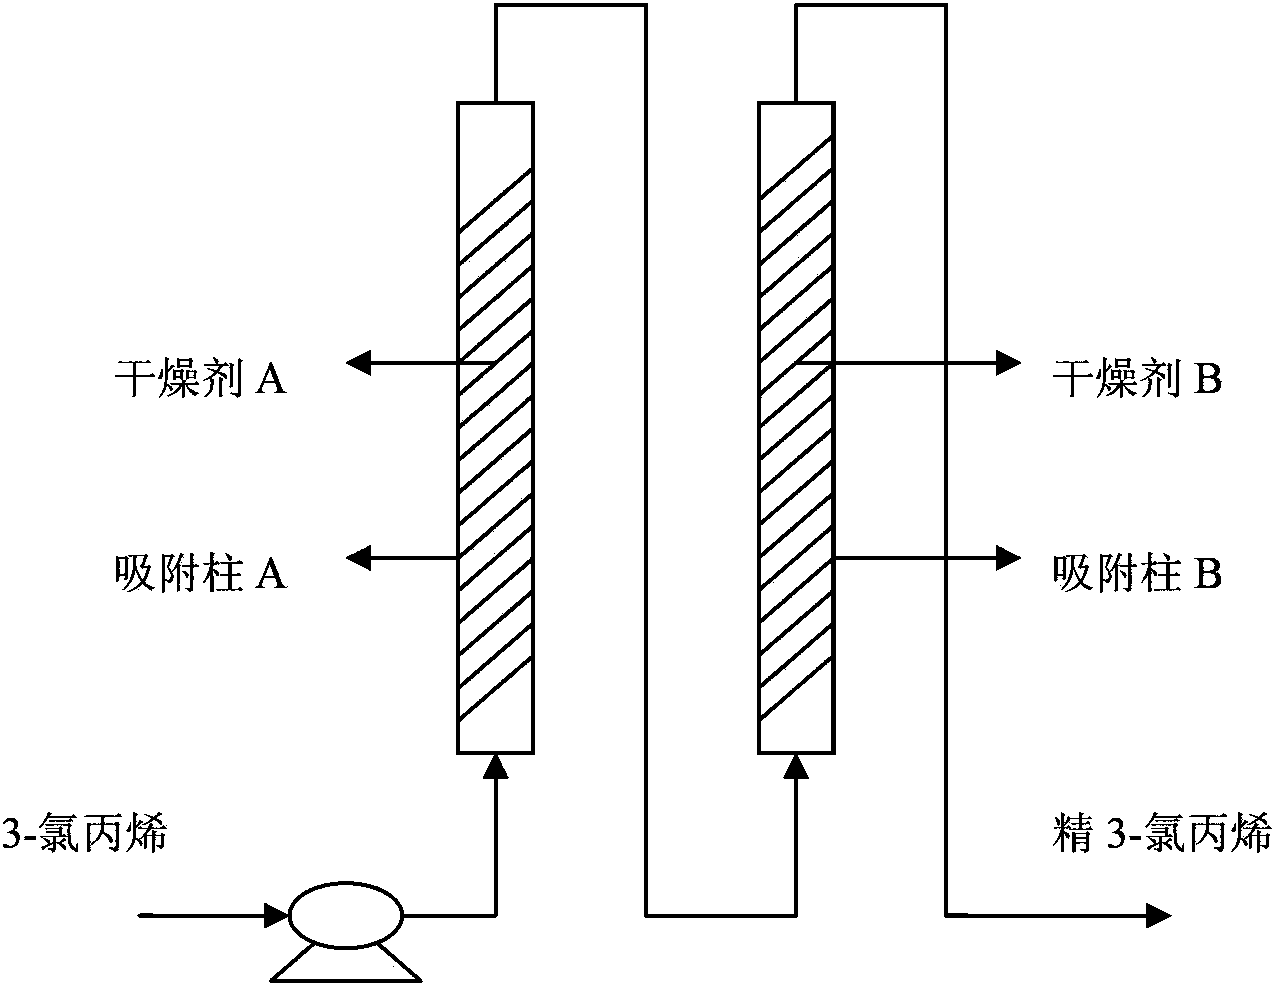 Deacidification and dehydration method of 3-chloropropene